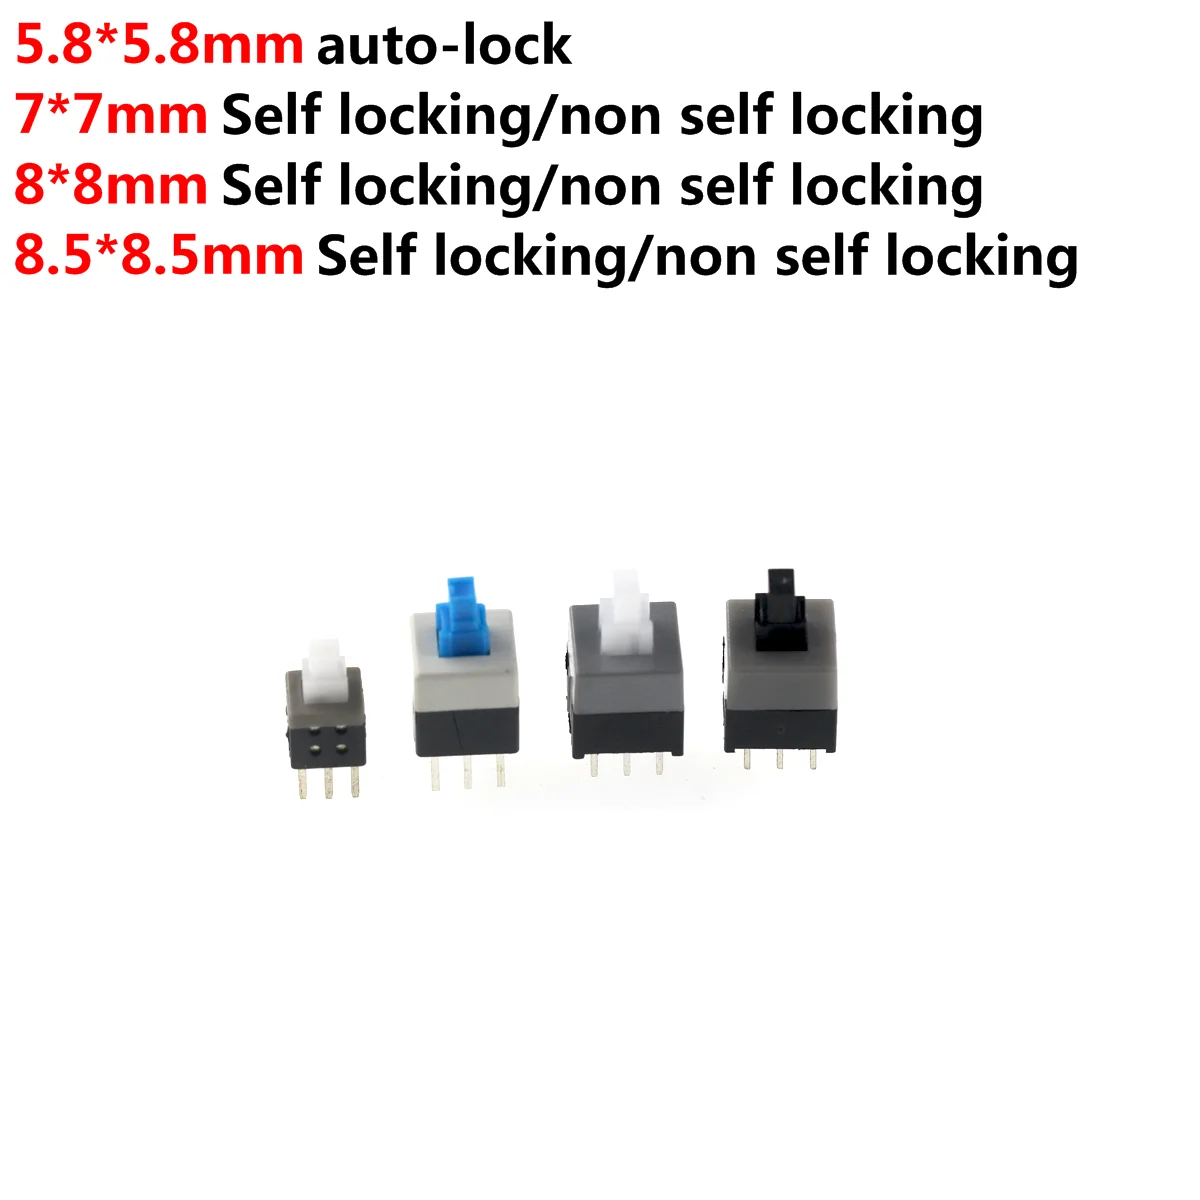 100PCS/LOT 5.8x5.8 7x7 8x8 8.5x8.5mm Self Locking / UNlock Push Tactile Power Micro Switch 6 Pin Button Switches micro switch tactile push button for bmw car remote control button for benz slide switches 3 5 2 7 1 4